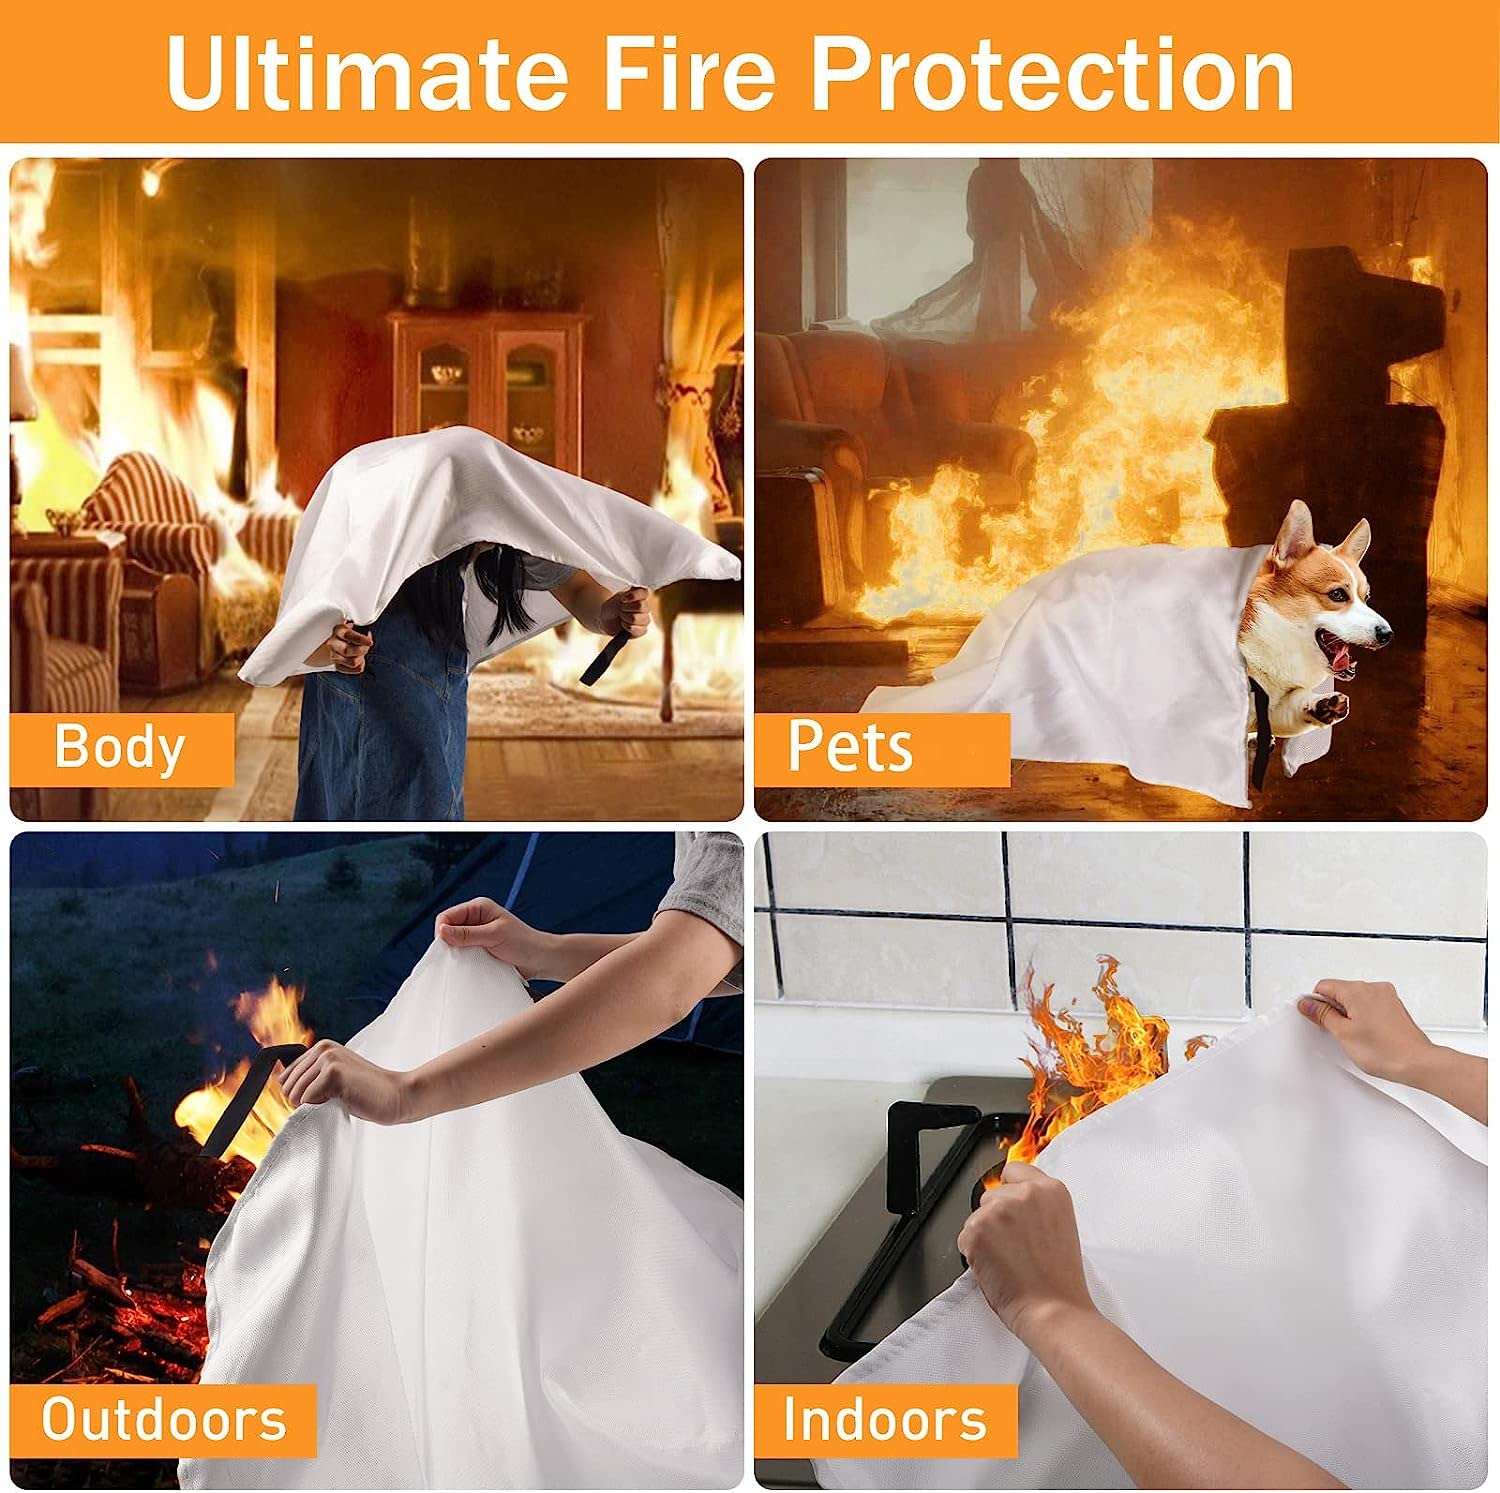 Mondoshop Fire Blanket for Home Kitchen Emergency, Prepared Fire Suppression Blanket Hero Fireproof Blanket Fire Retardant Blankets for Car, Fireplace, Camping, Picnic, Grill(40